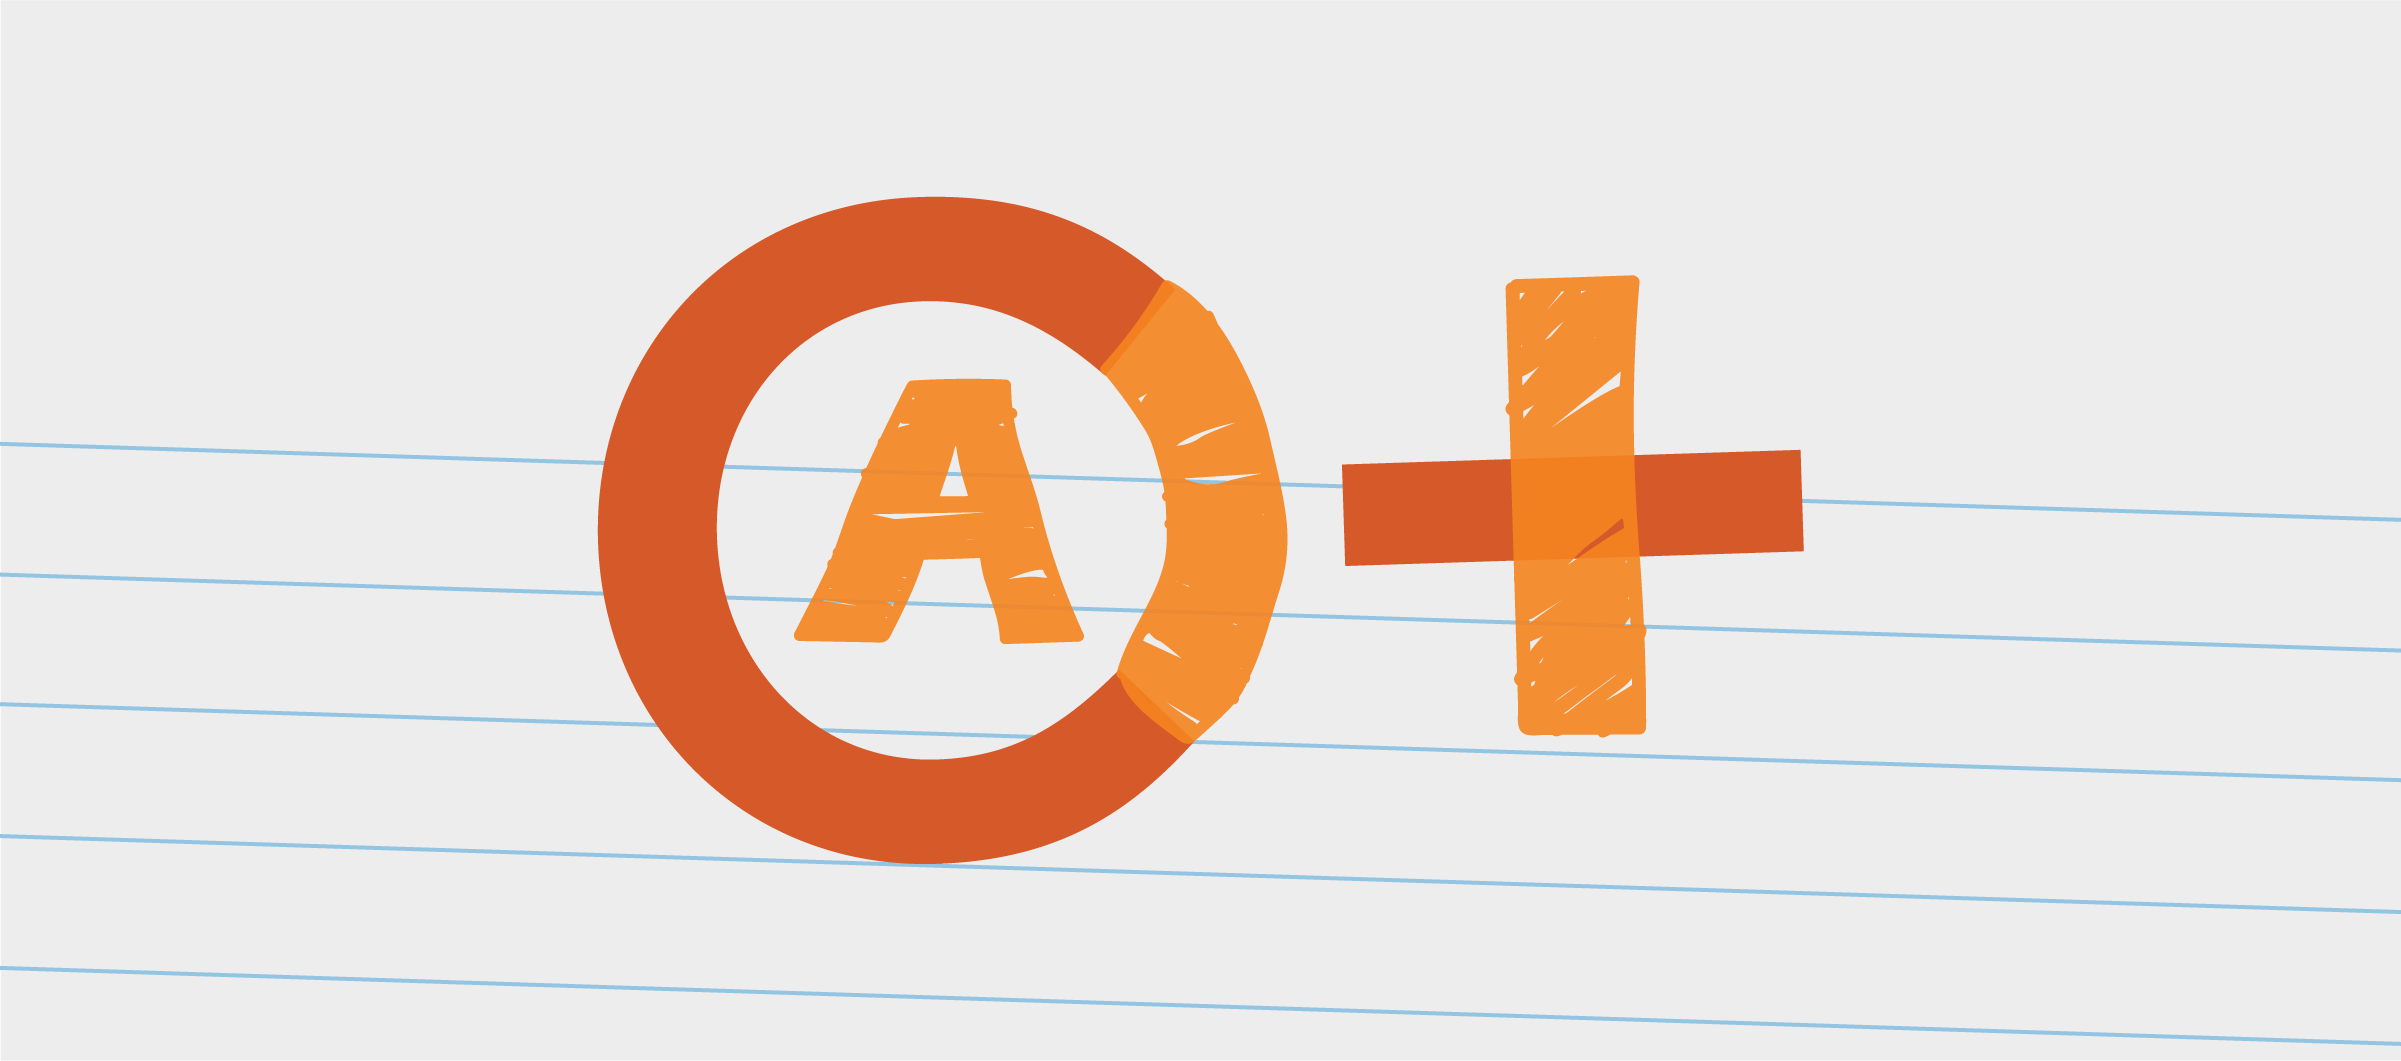 Making the Grade: How Healthcare Marketing can Move From “C” to “A”